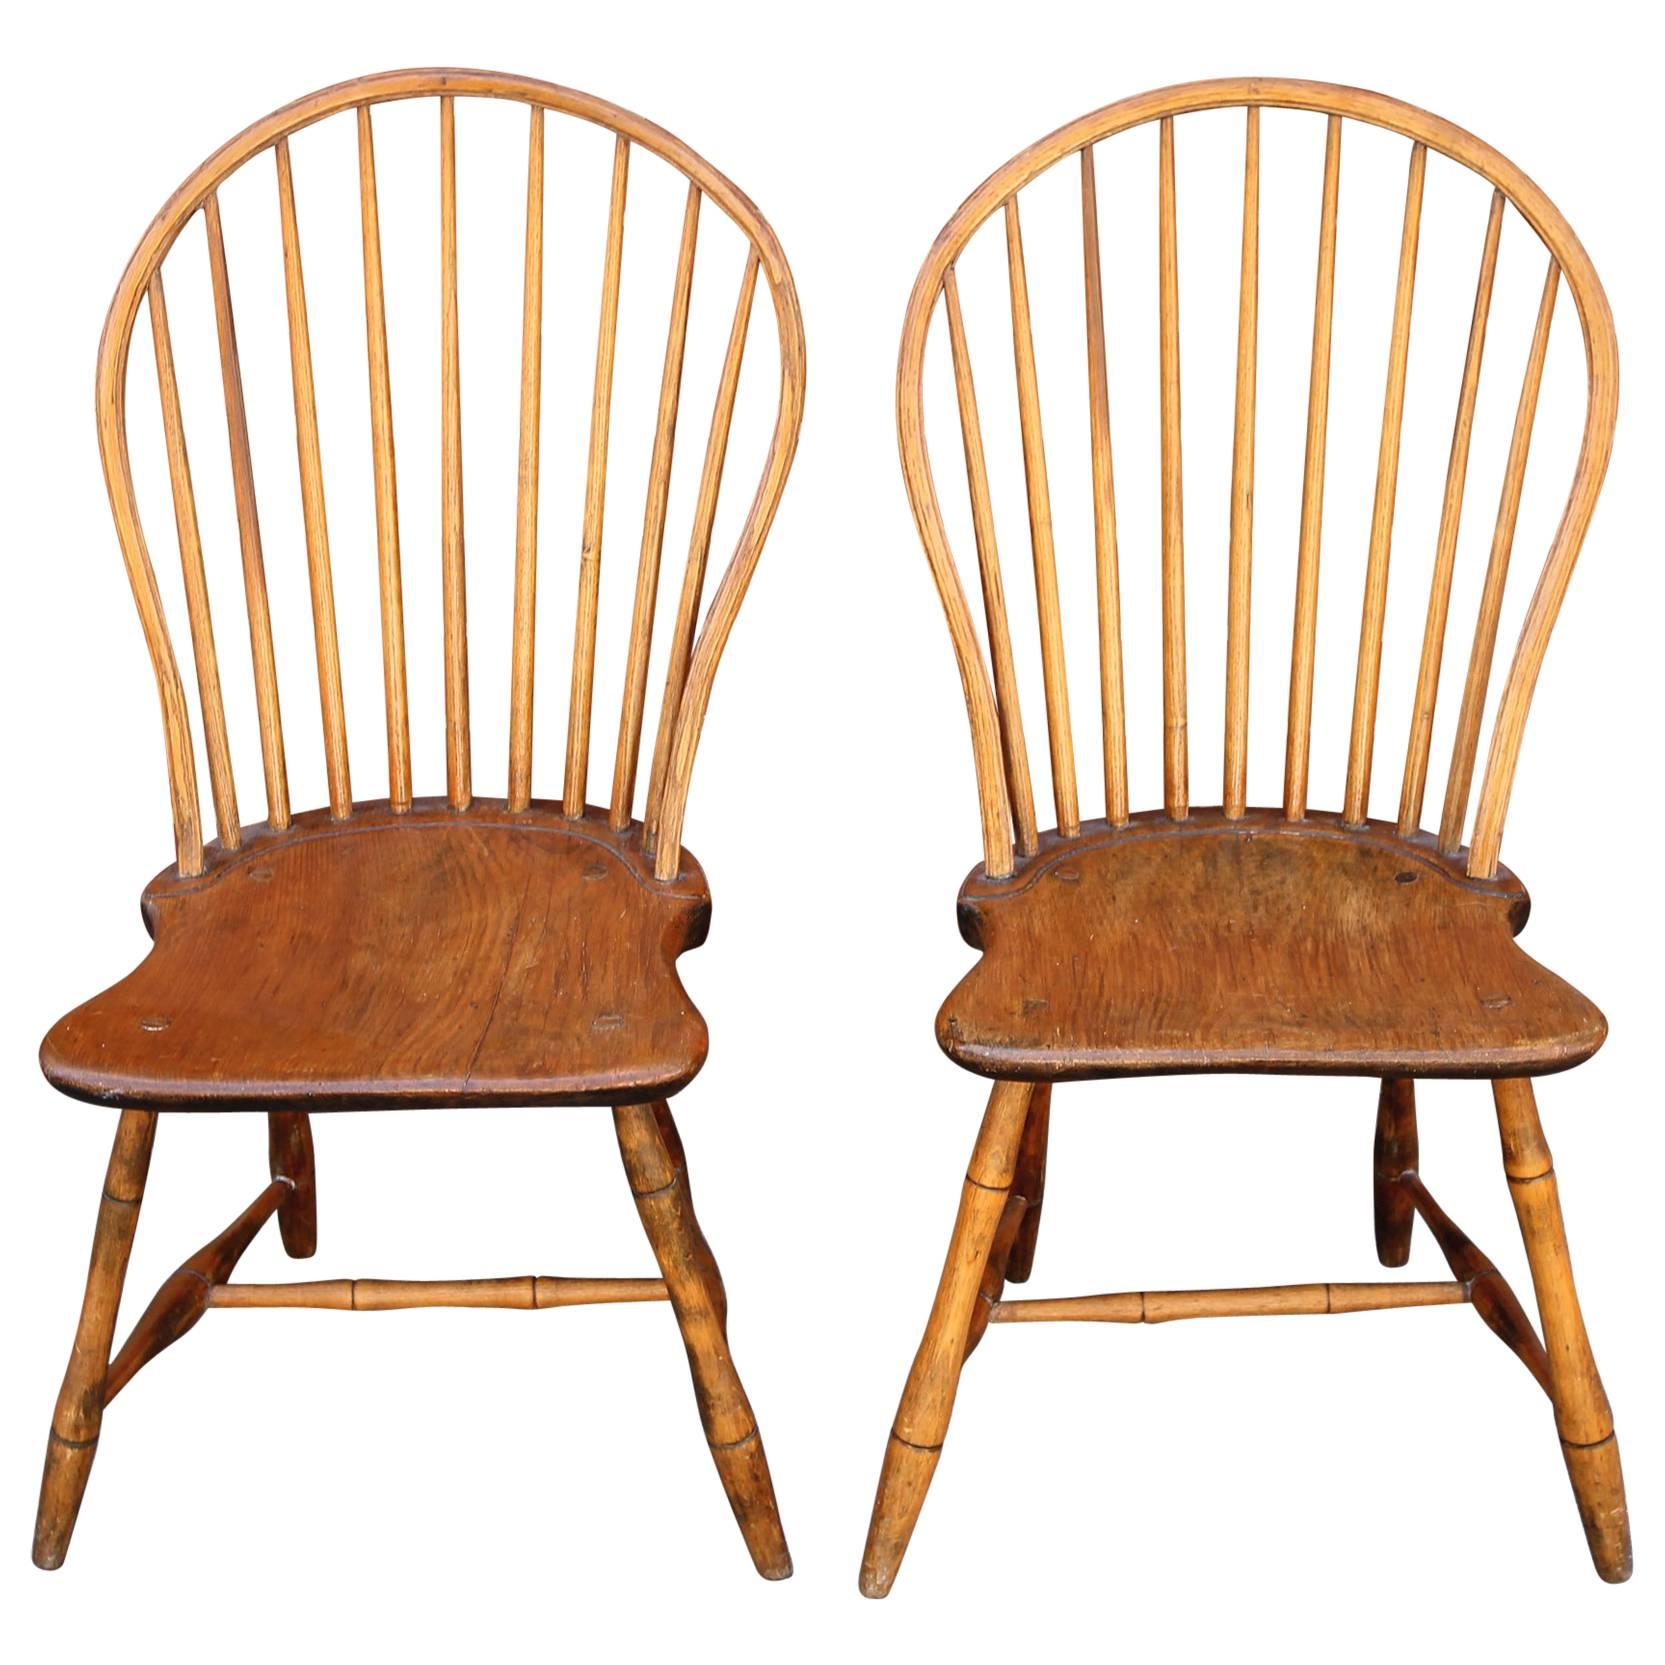 Pair of Bow-Back Windsor Chairs For Sale